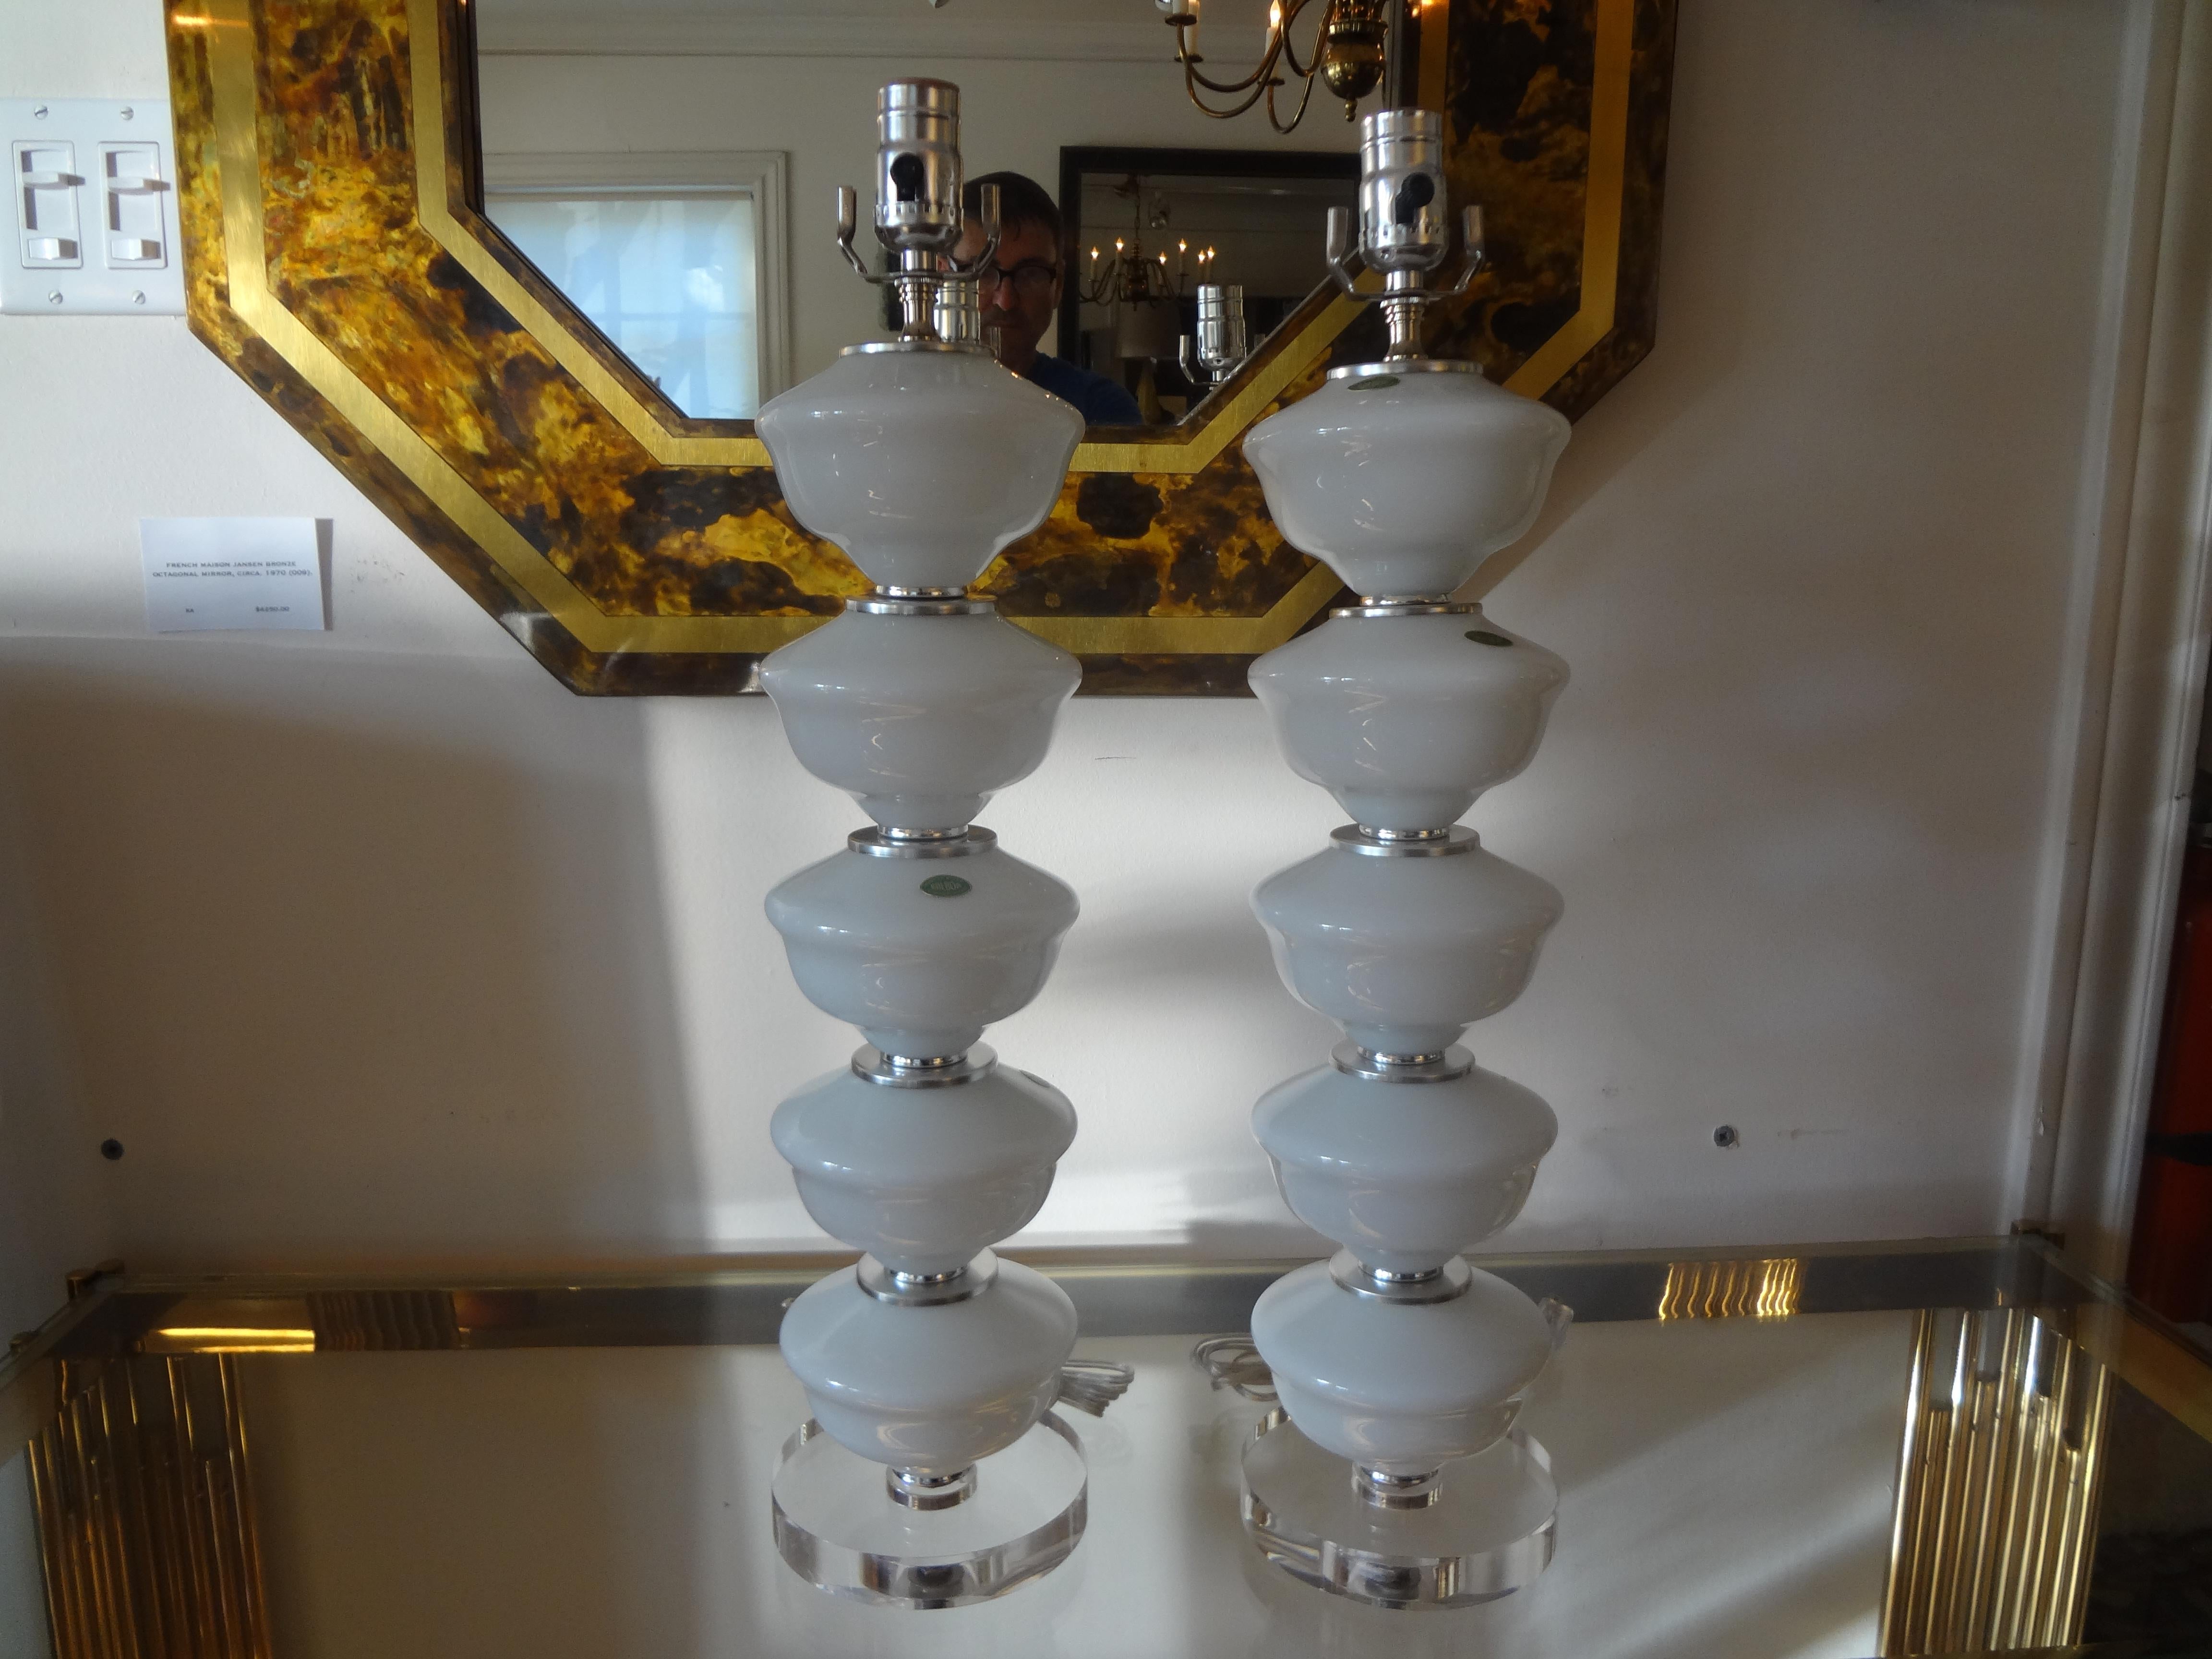 Pair of midcentury white Murano glass lamps.
Stunning pair of midcentury Italian white Murano opaline glass lamps by Balboa. This great pair of Hollywood Regency stacked Murano glass lamps have new lucite bases. Featured blown Murano lamps and are